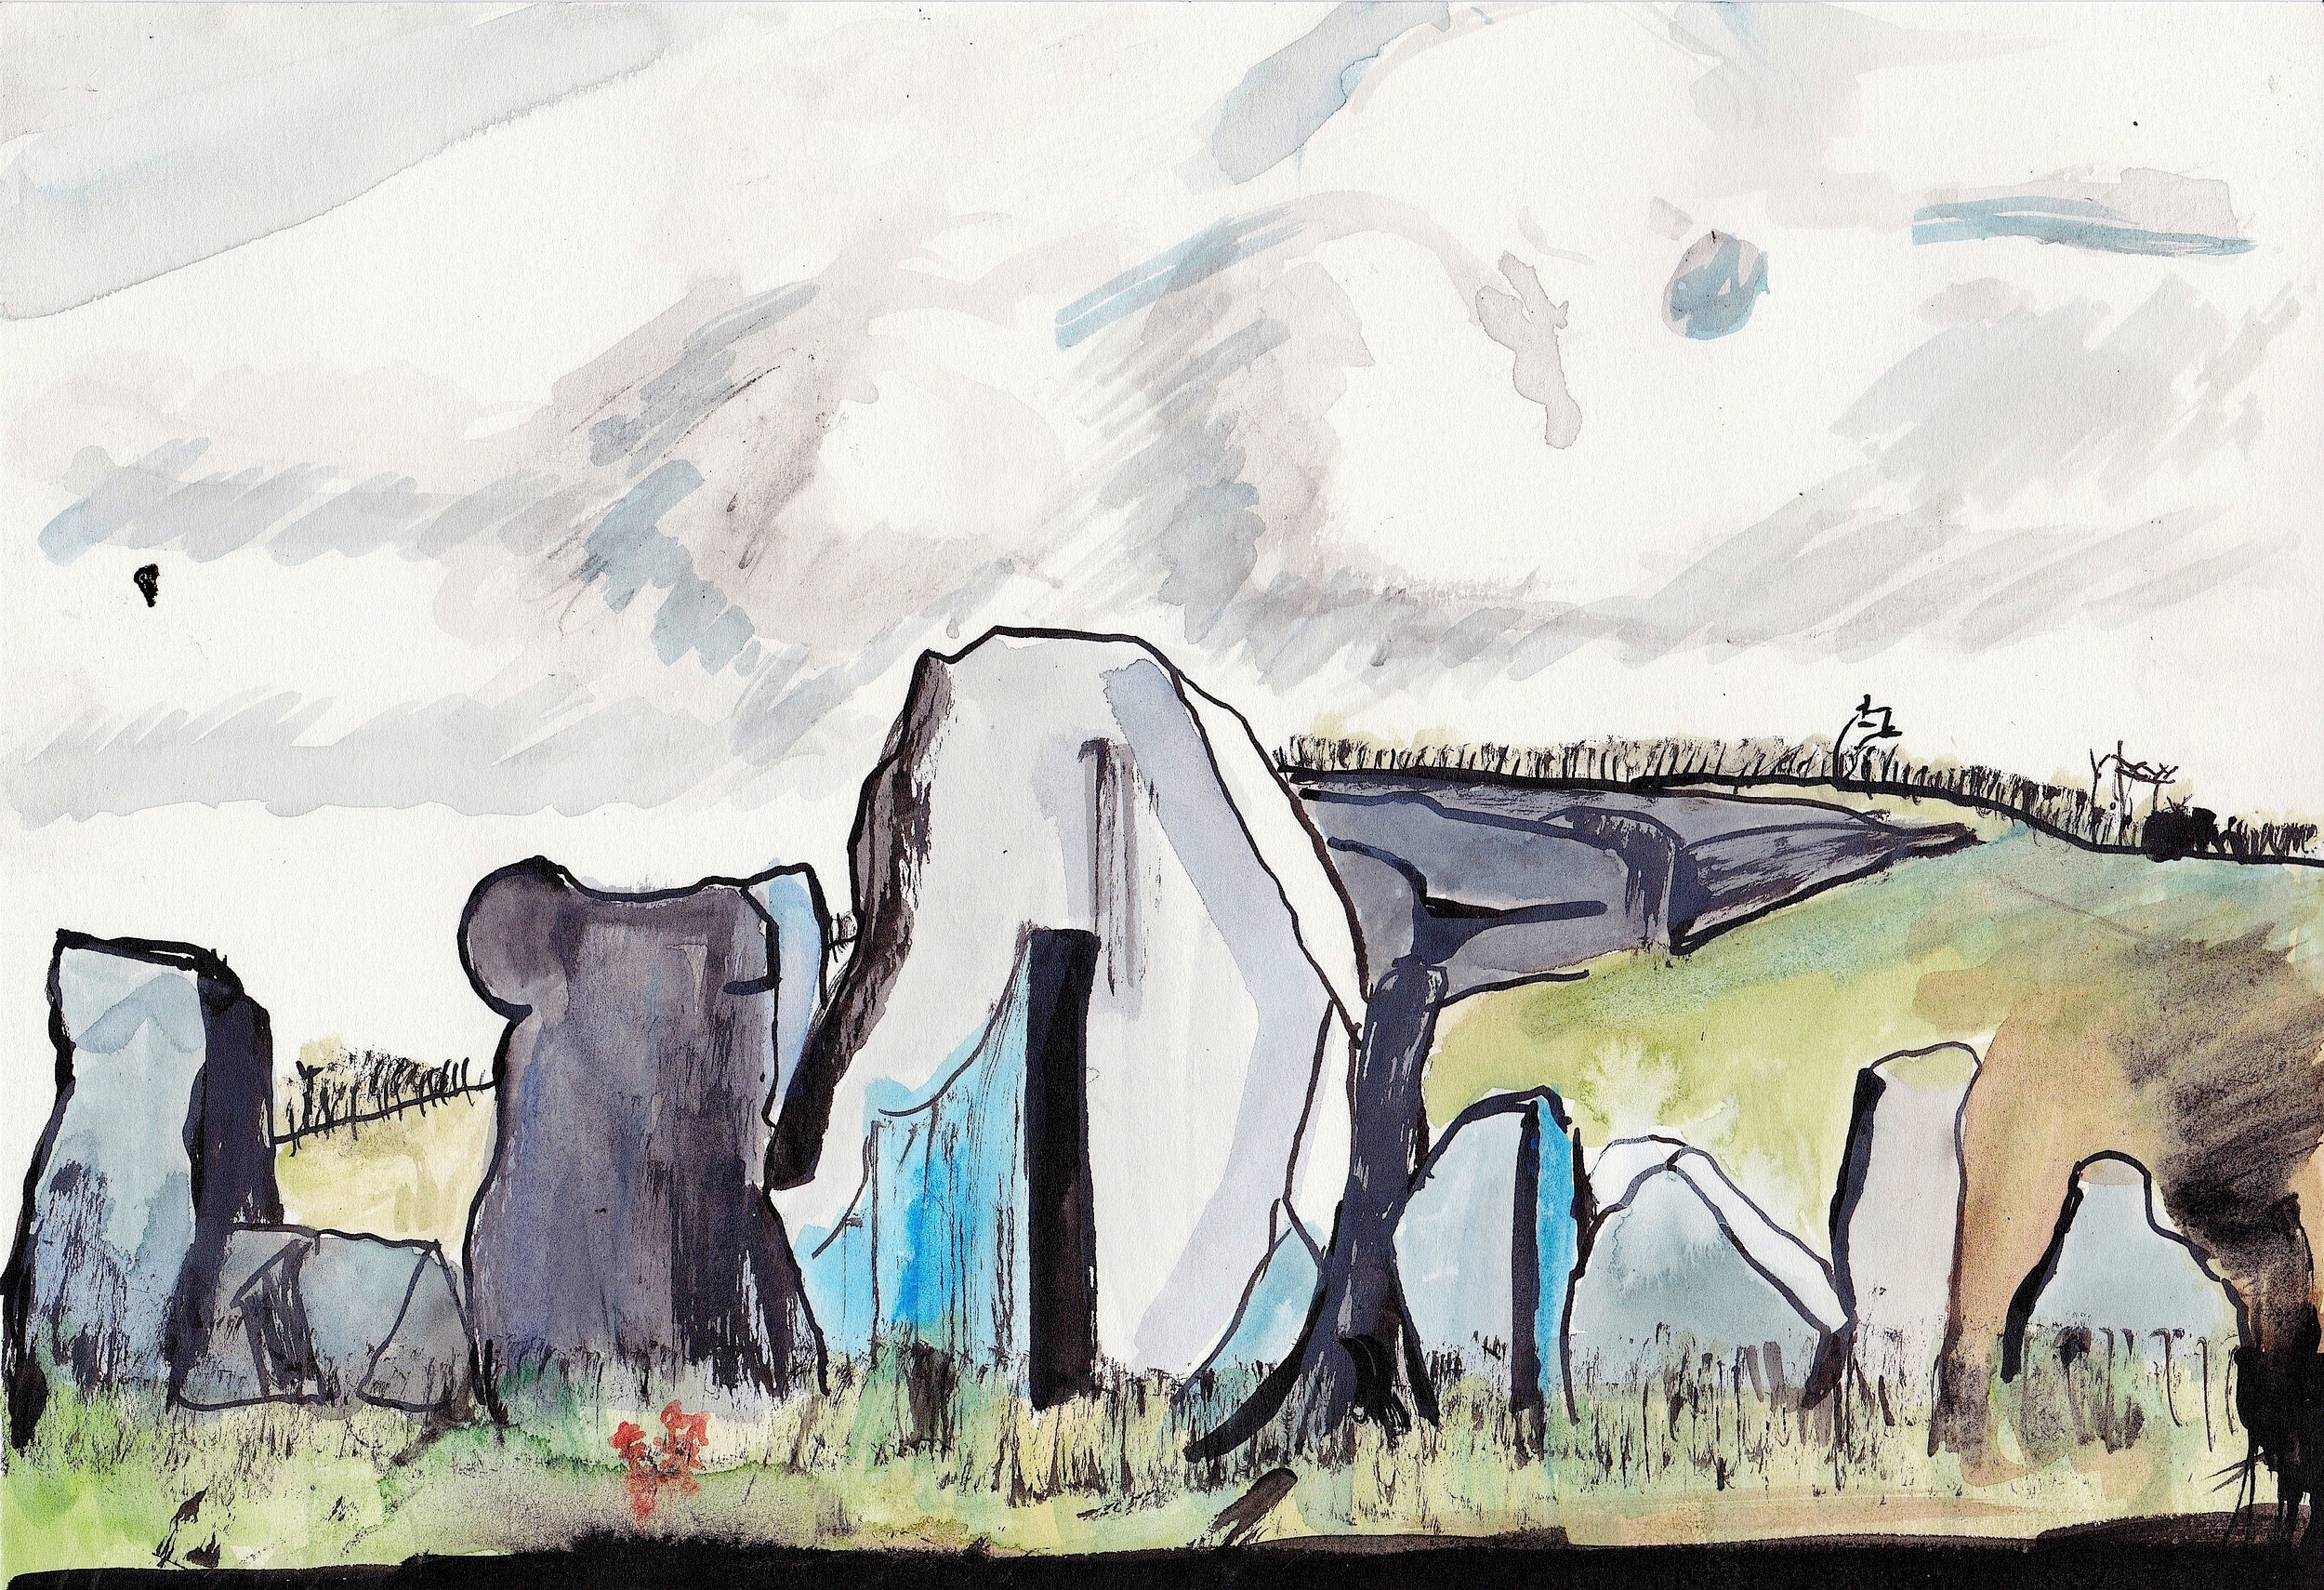 'Location Painting, West Kennet Long Barrow, Avebury Wiltshire'